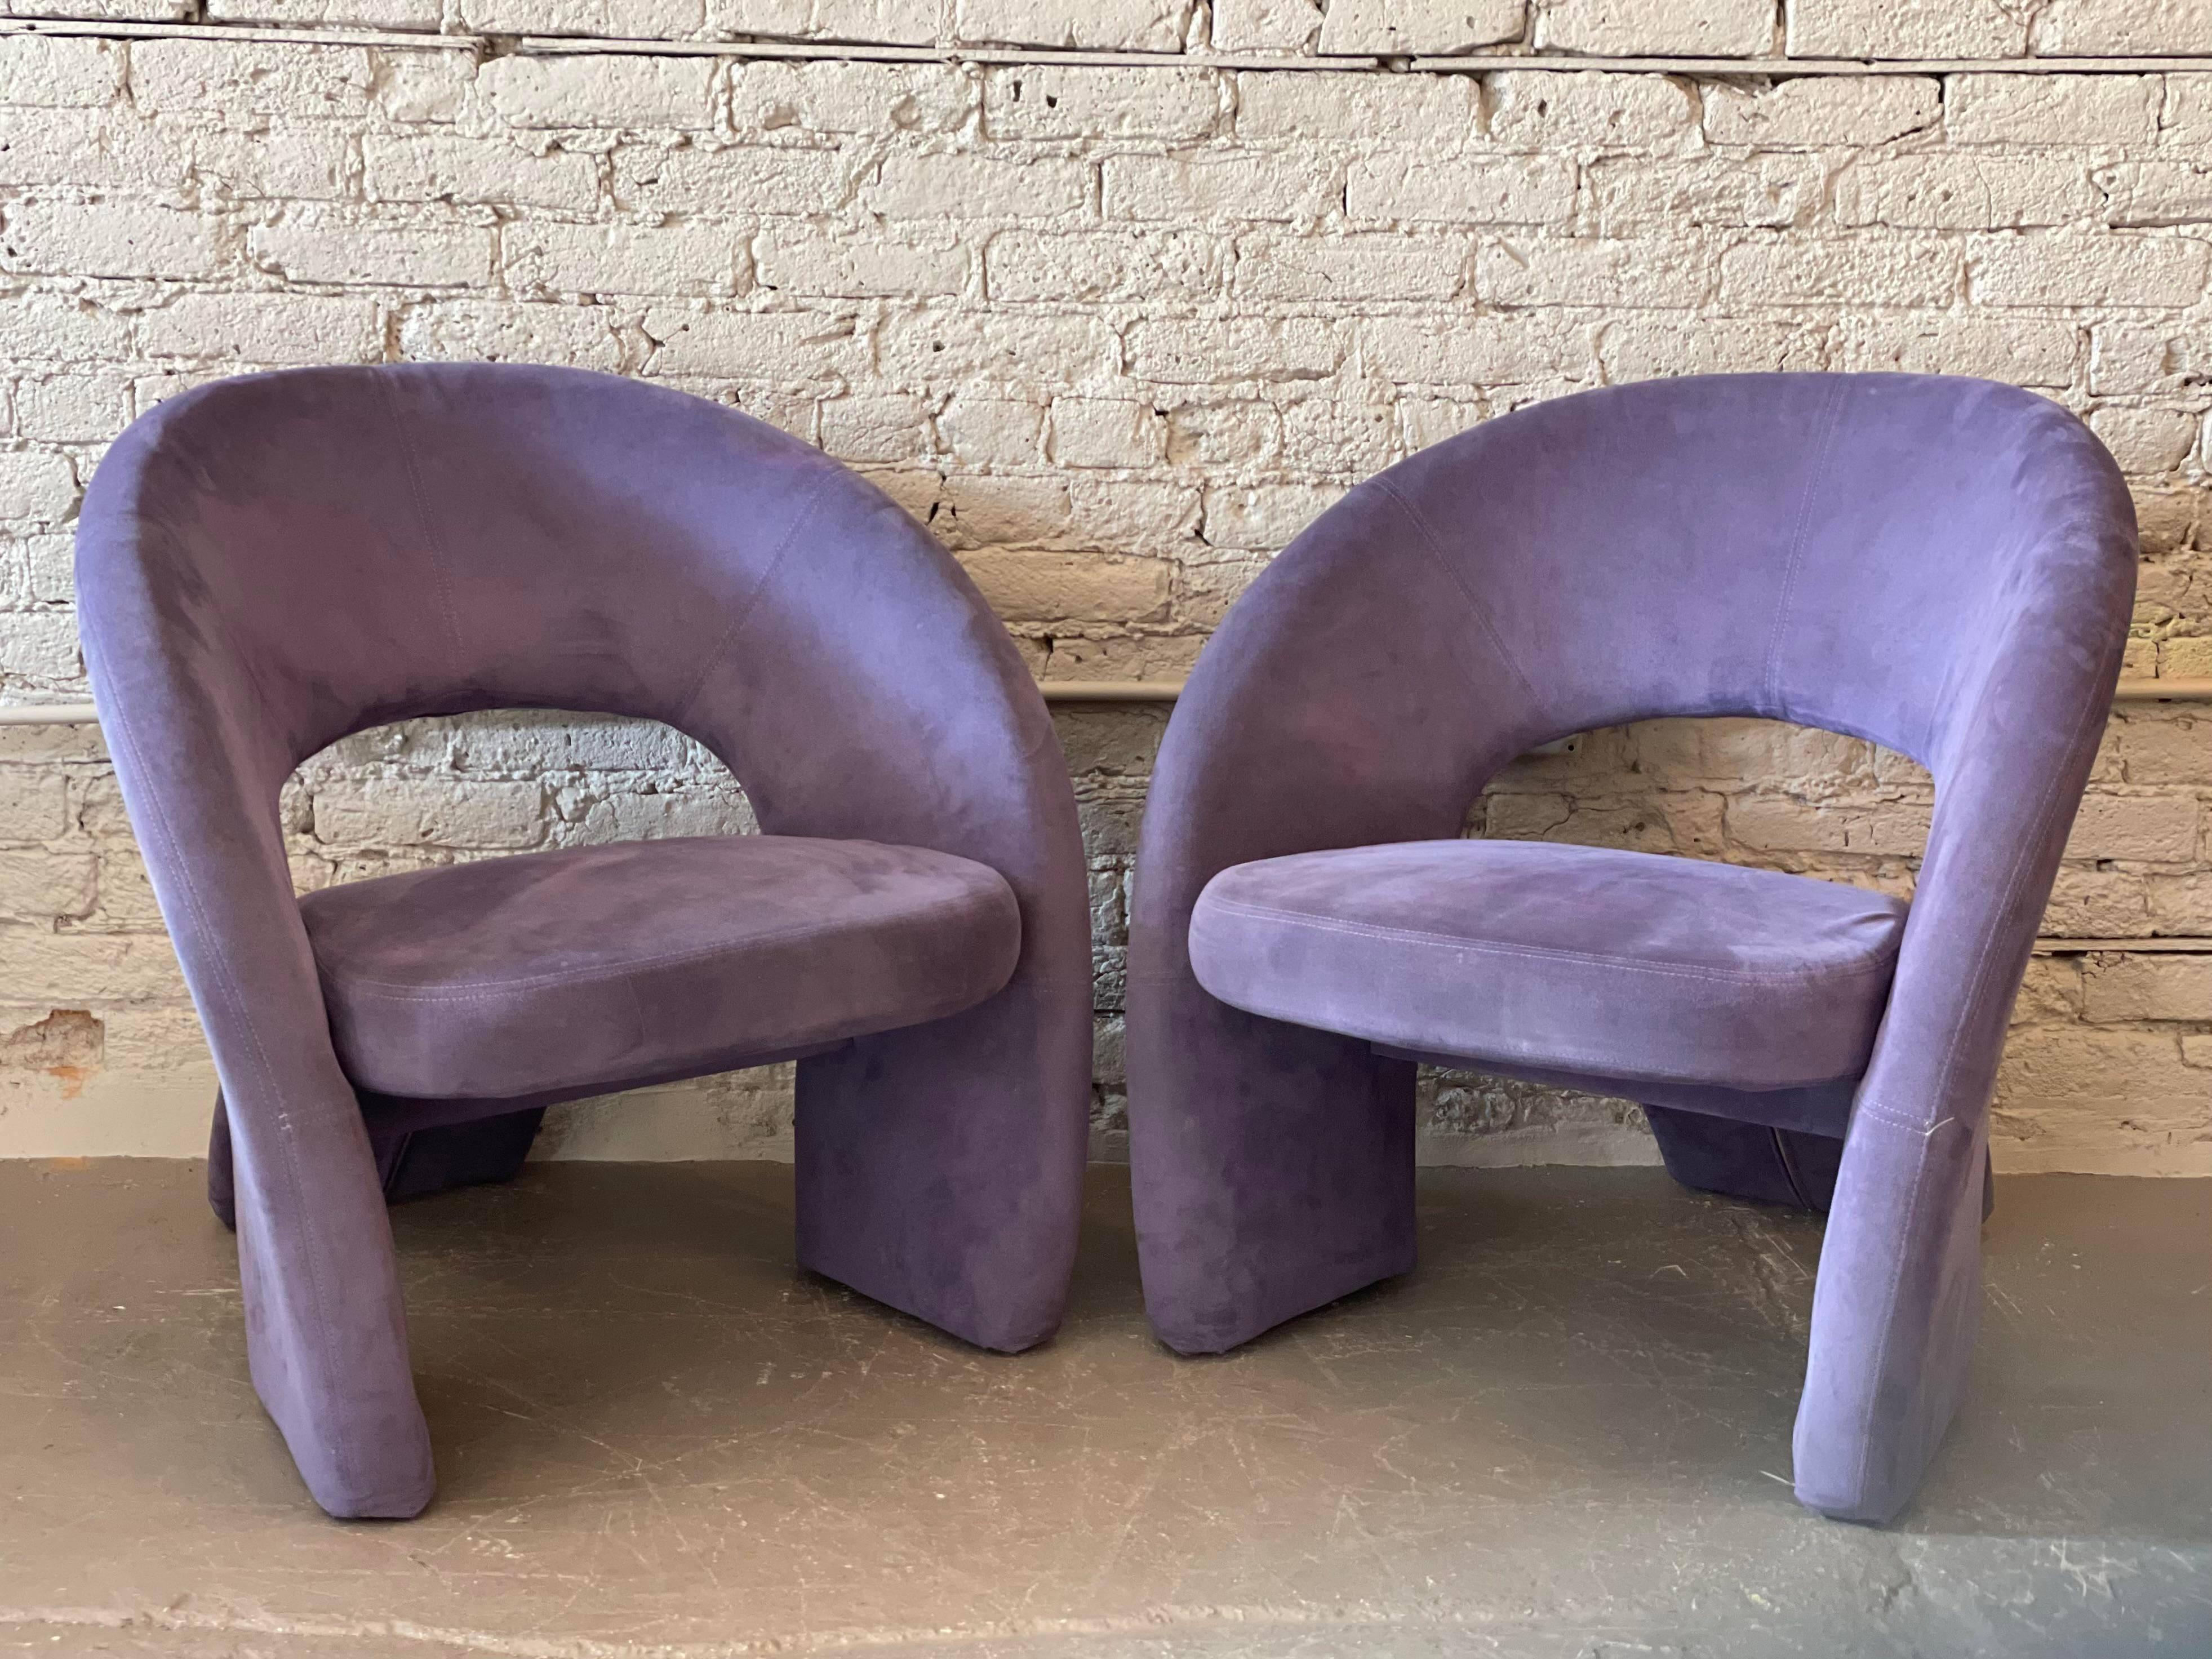 Super cool and comfortable postmodern chairs. Great angles, they look good from all directions. The original ultra suede is in excellent condition and can be used as is. I also have two more identical chairs (one turquoise, one red) incase you need